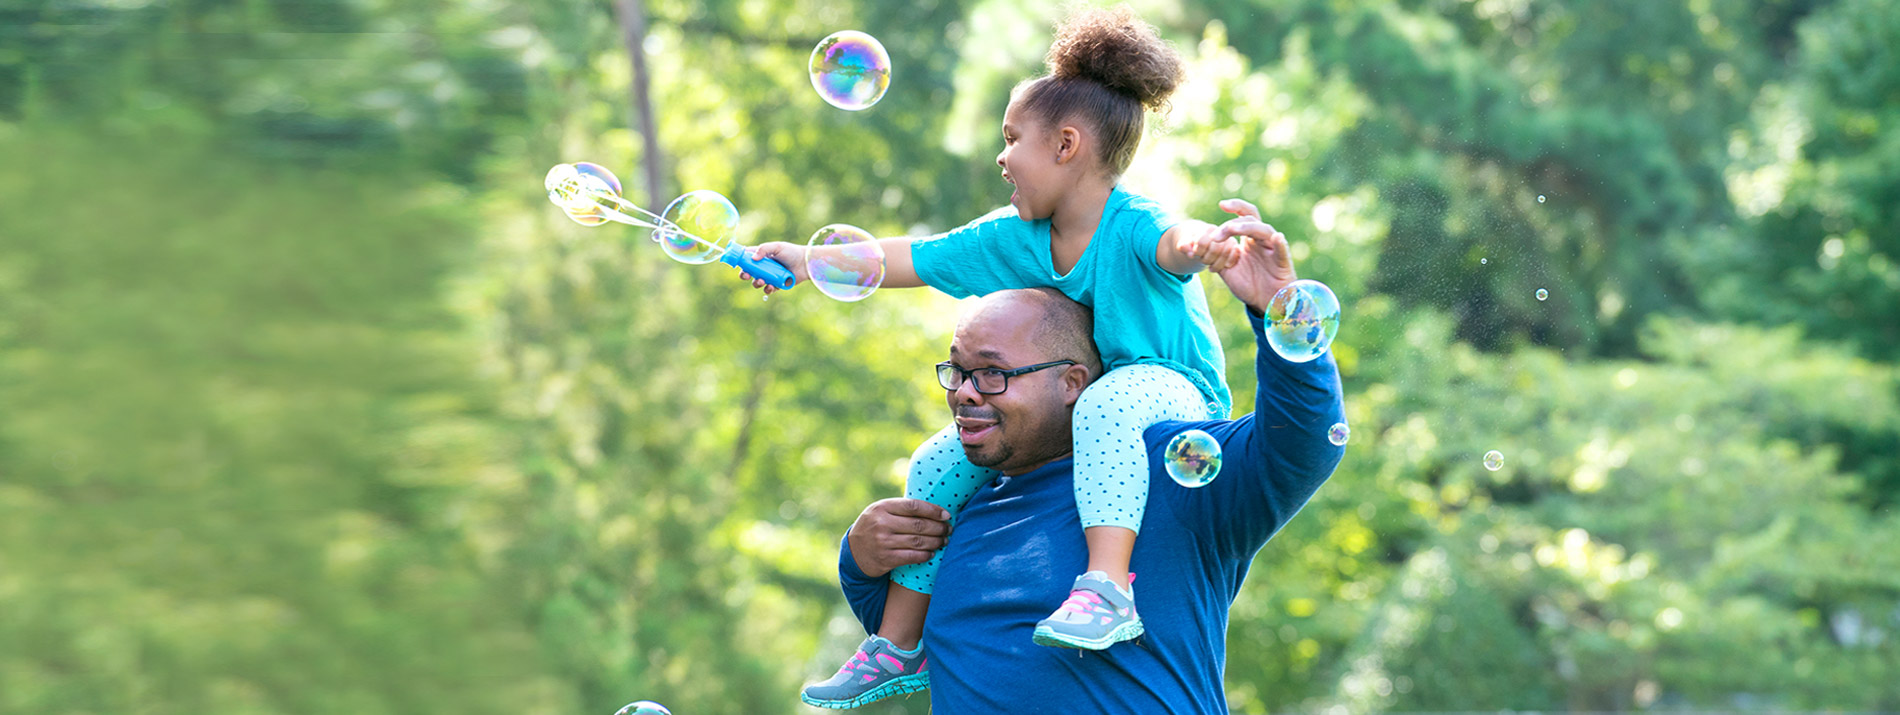 A dad playing with his daughter that is sitting on his shoulders playing with bubbles.